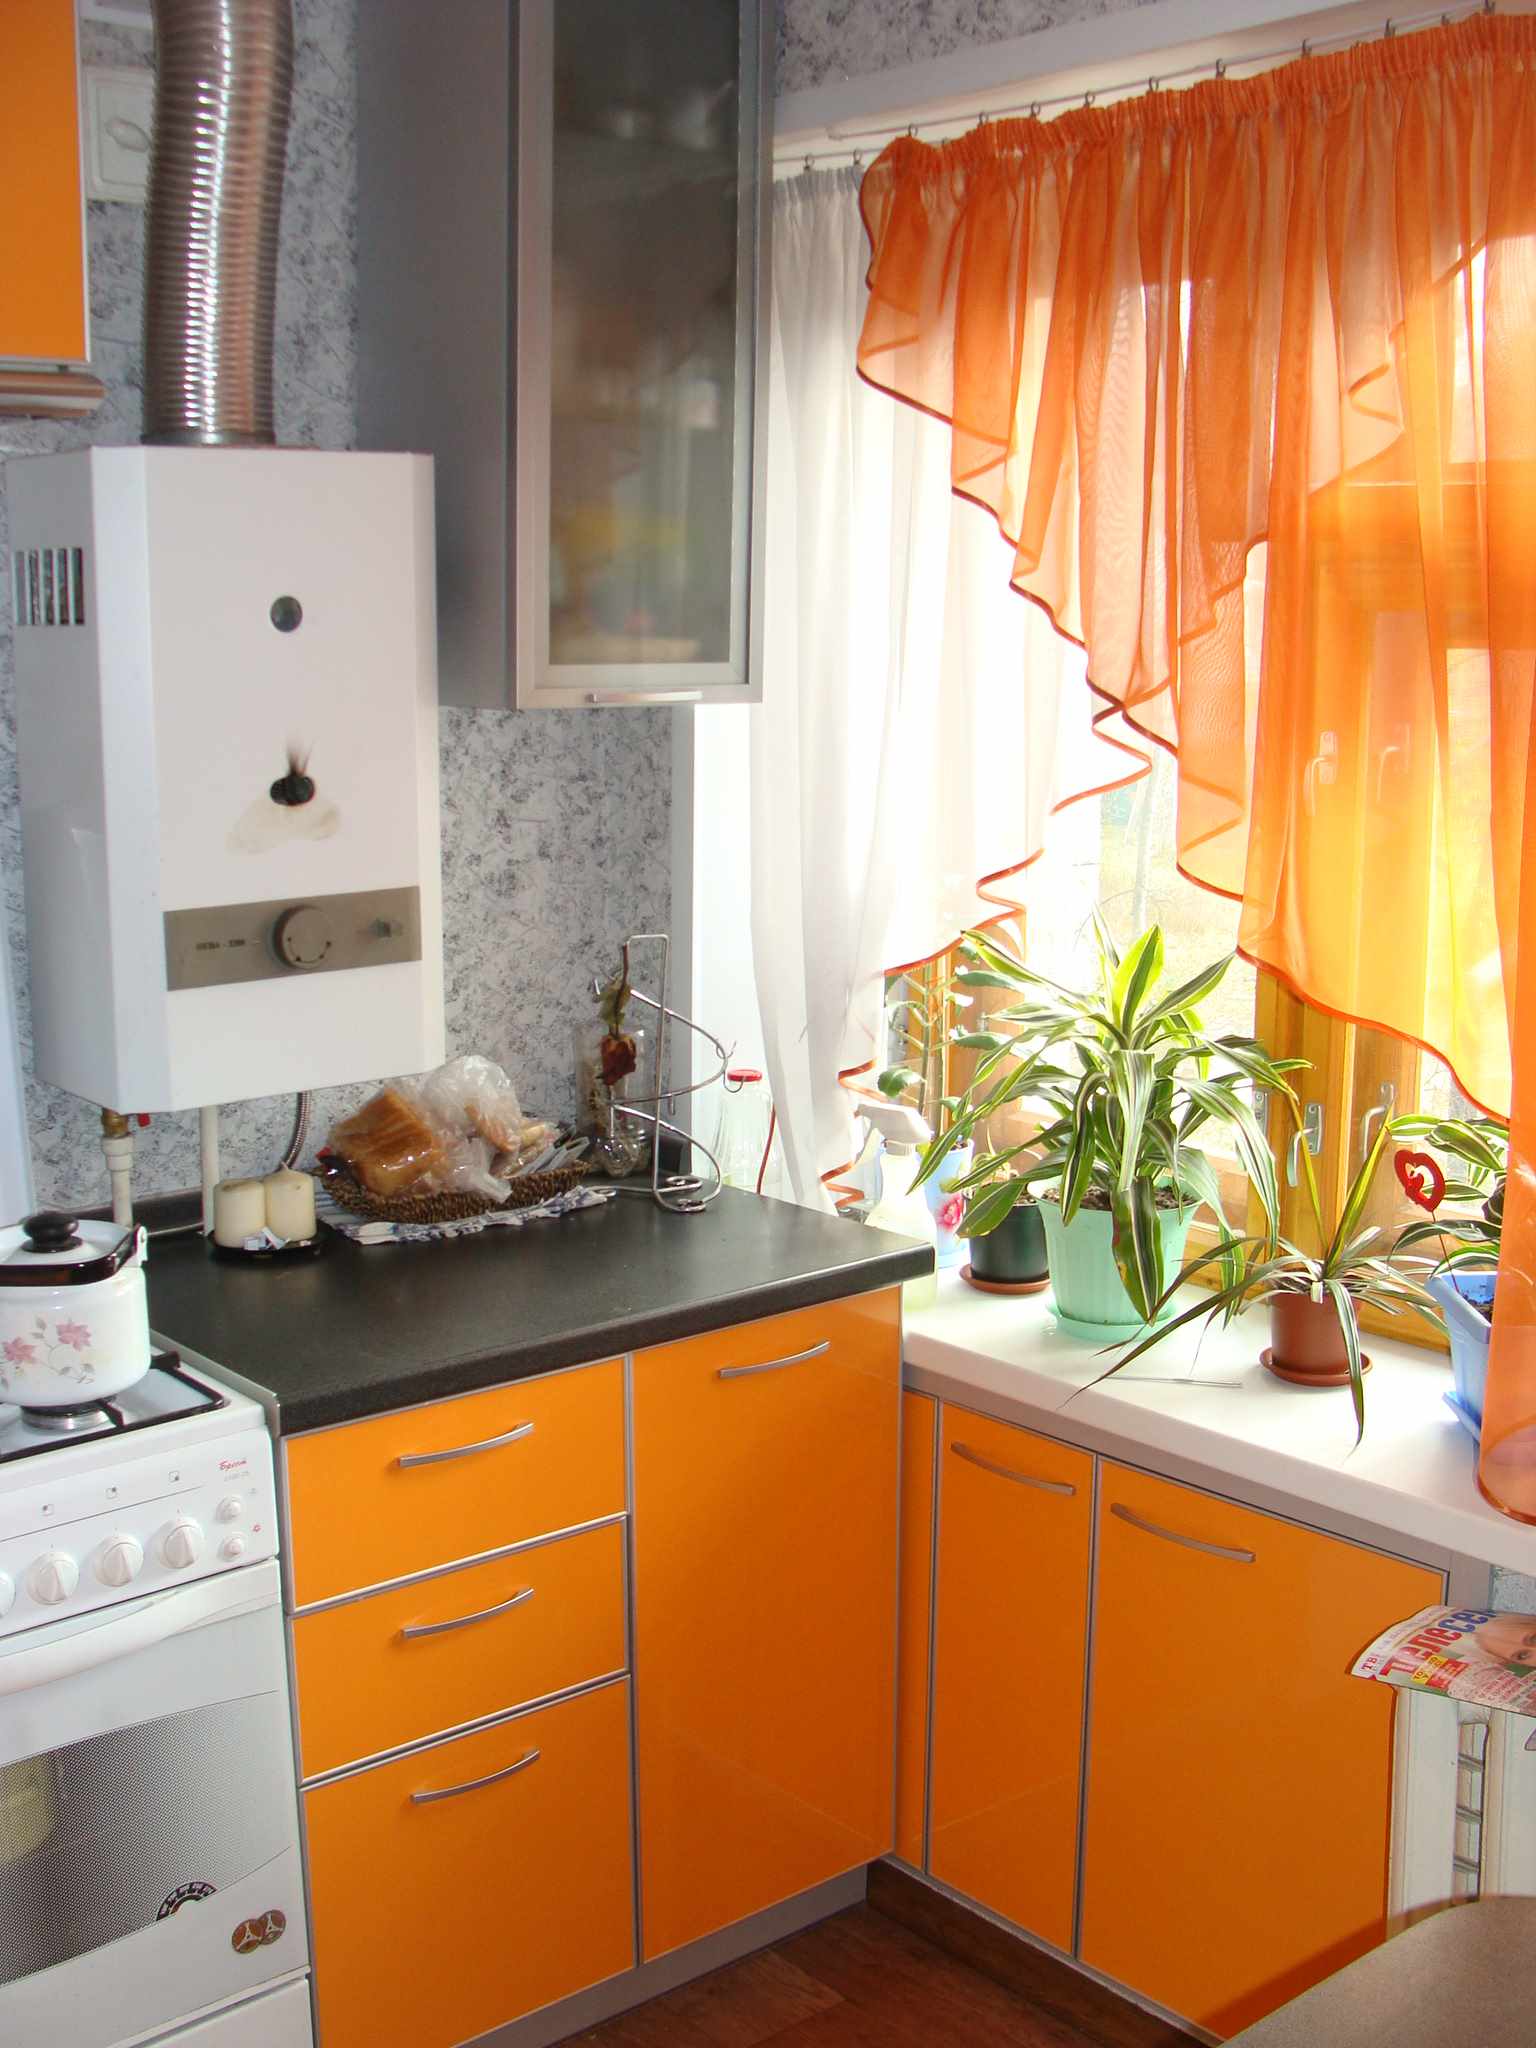 An example of a beautiful kitchen interior with a gas boiler